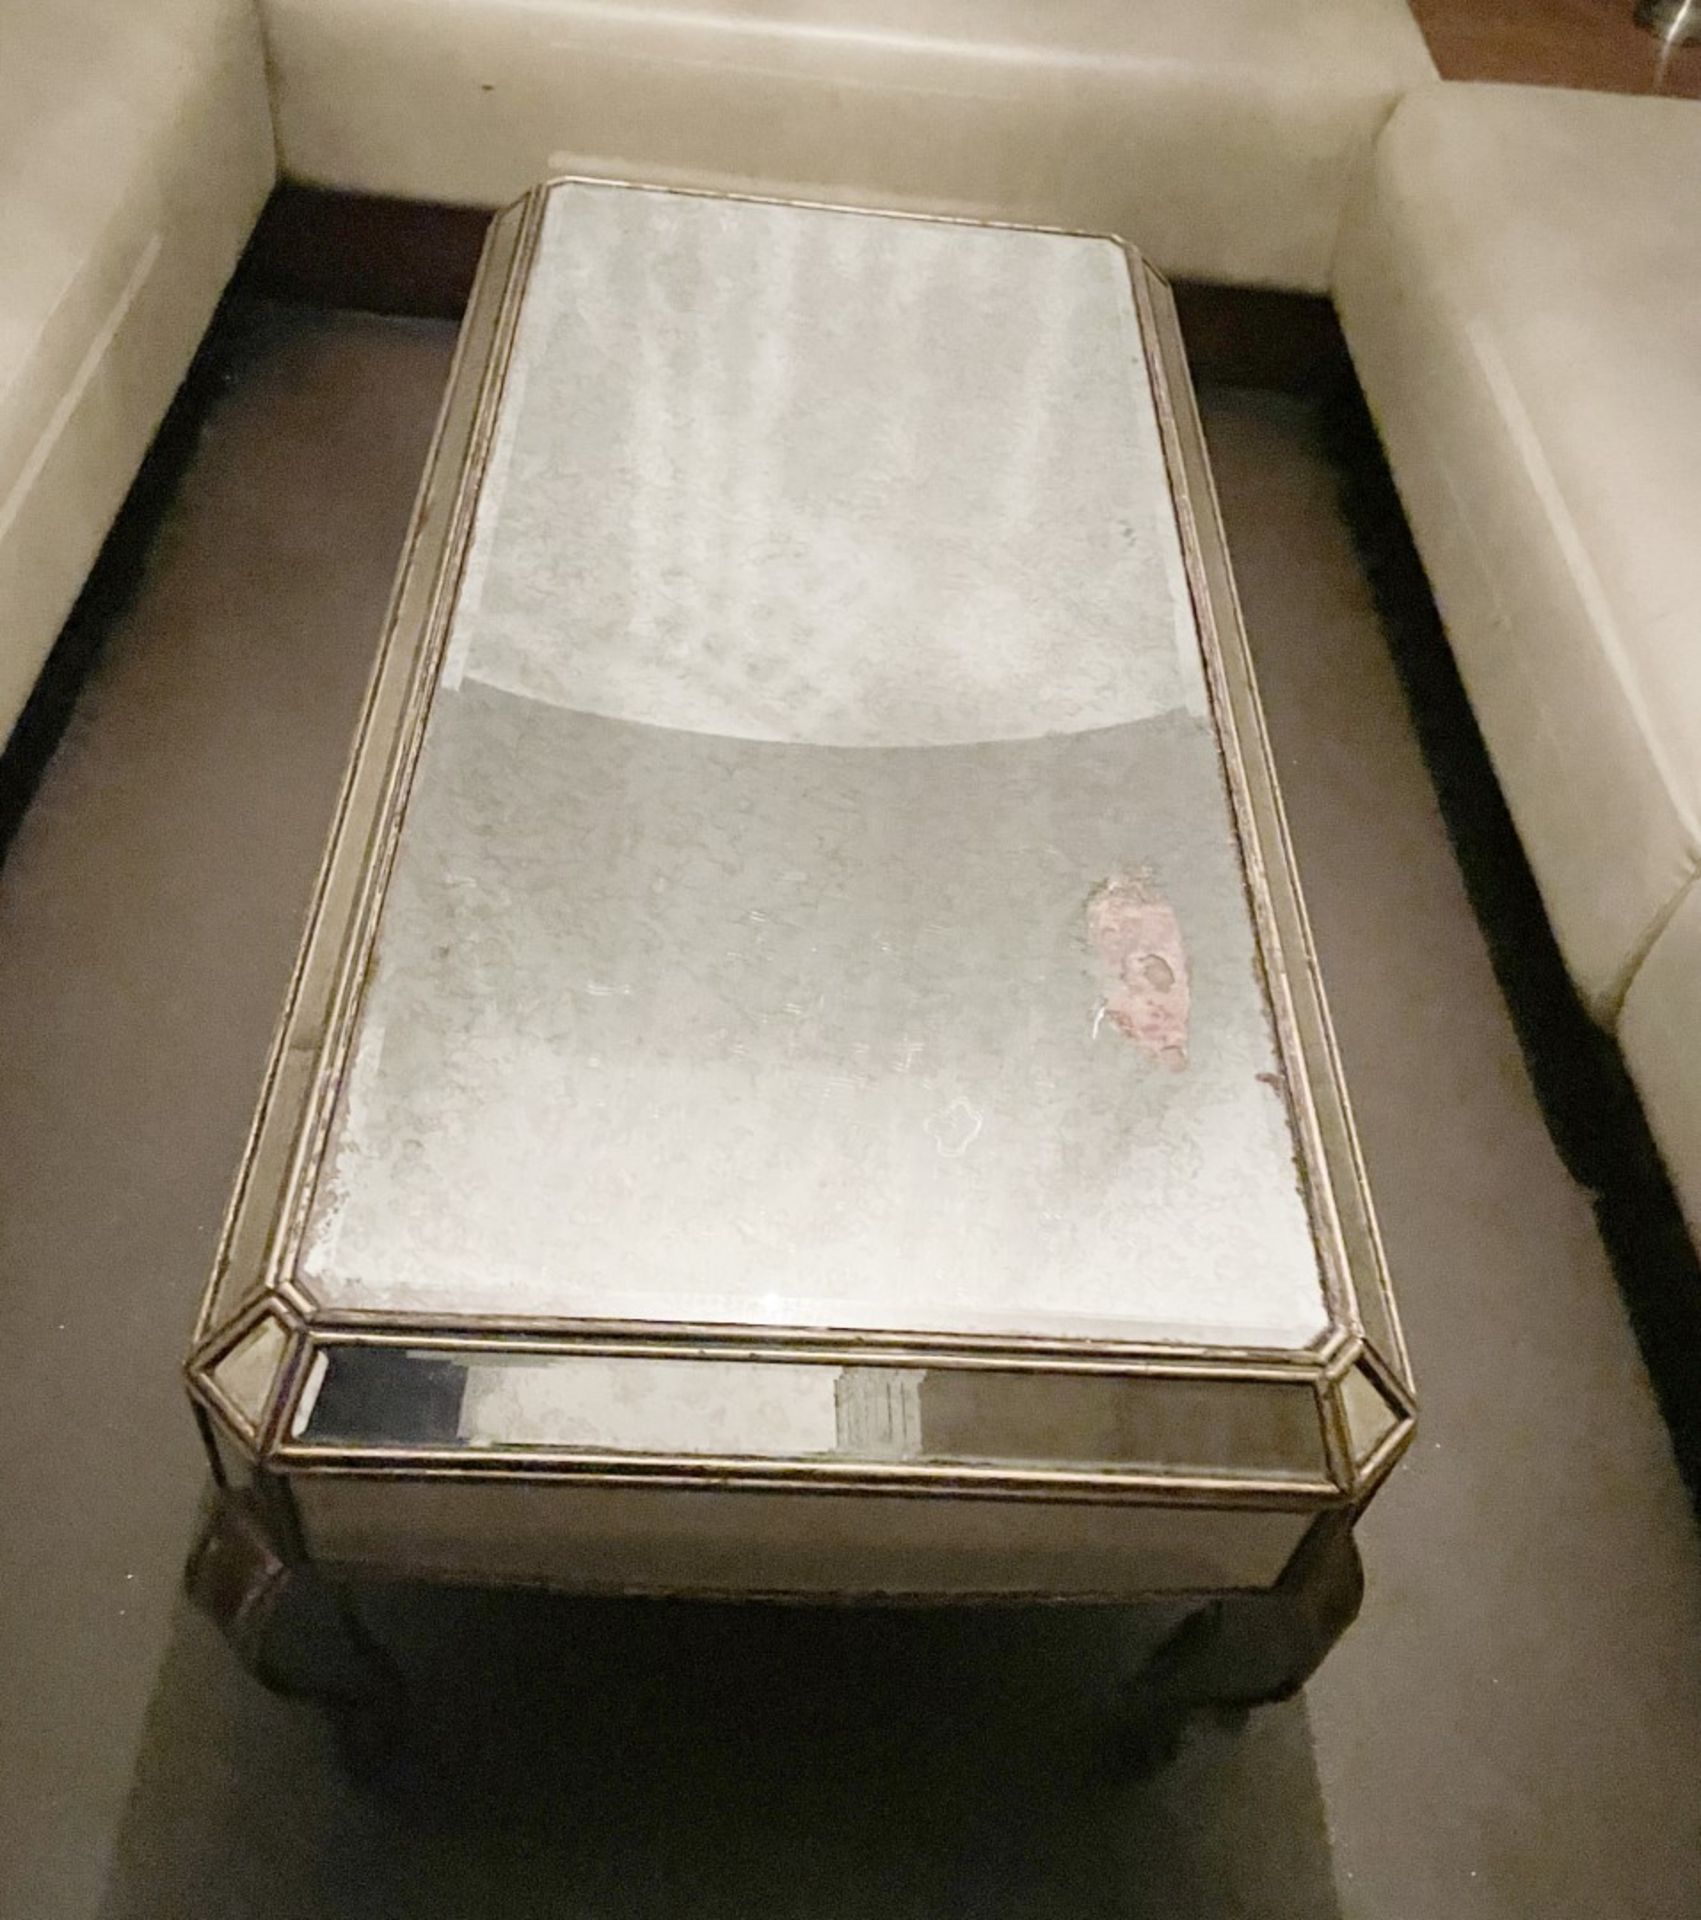 1 x Vintage French-style Mirrored Rectangular Cocktail Coffee Table with an Aged Aesthetic - Image 2 of 4